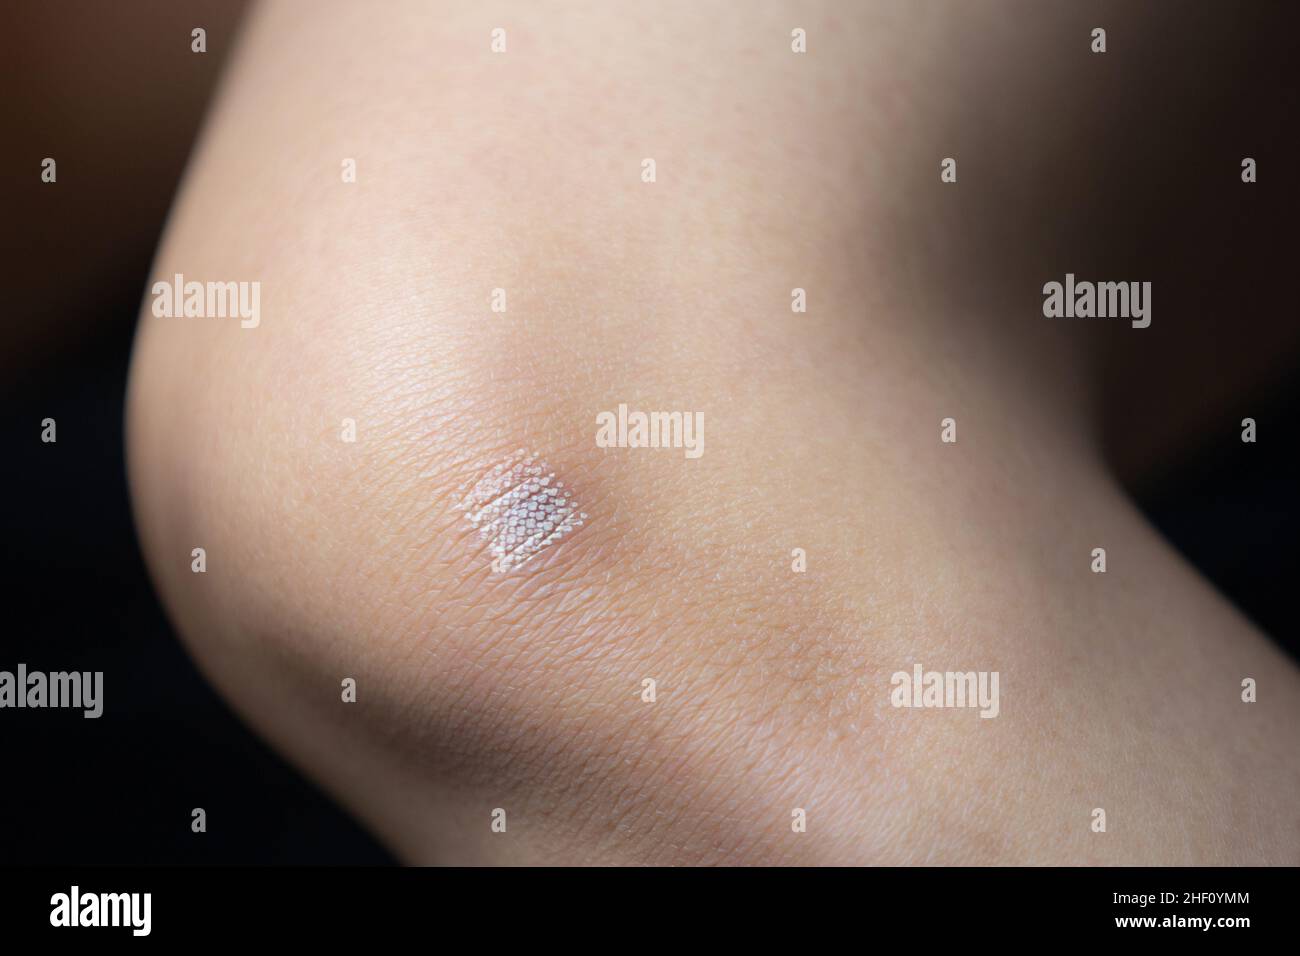 Marks after laser hair or atopic eczema scar removal from the skin. CO2 technique. Stock Photo